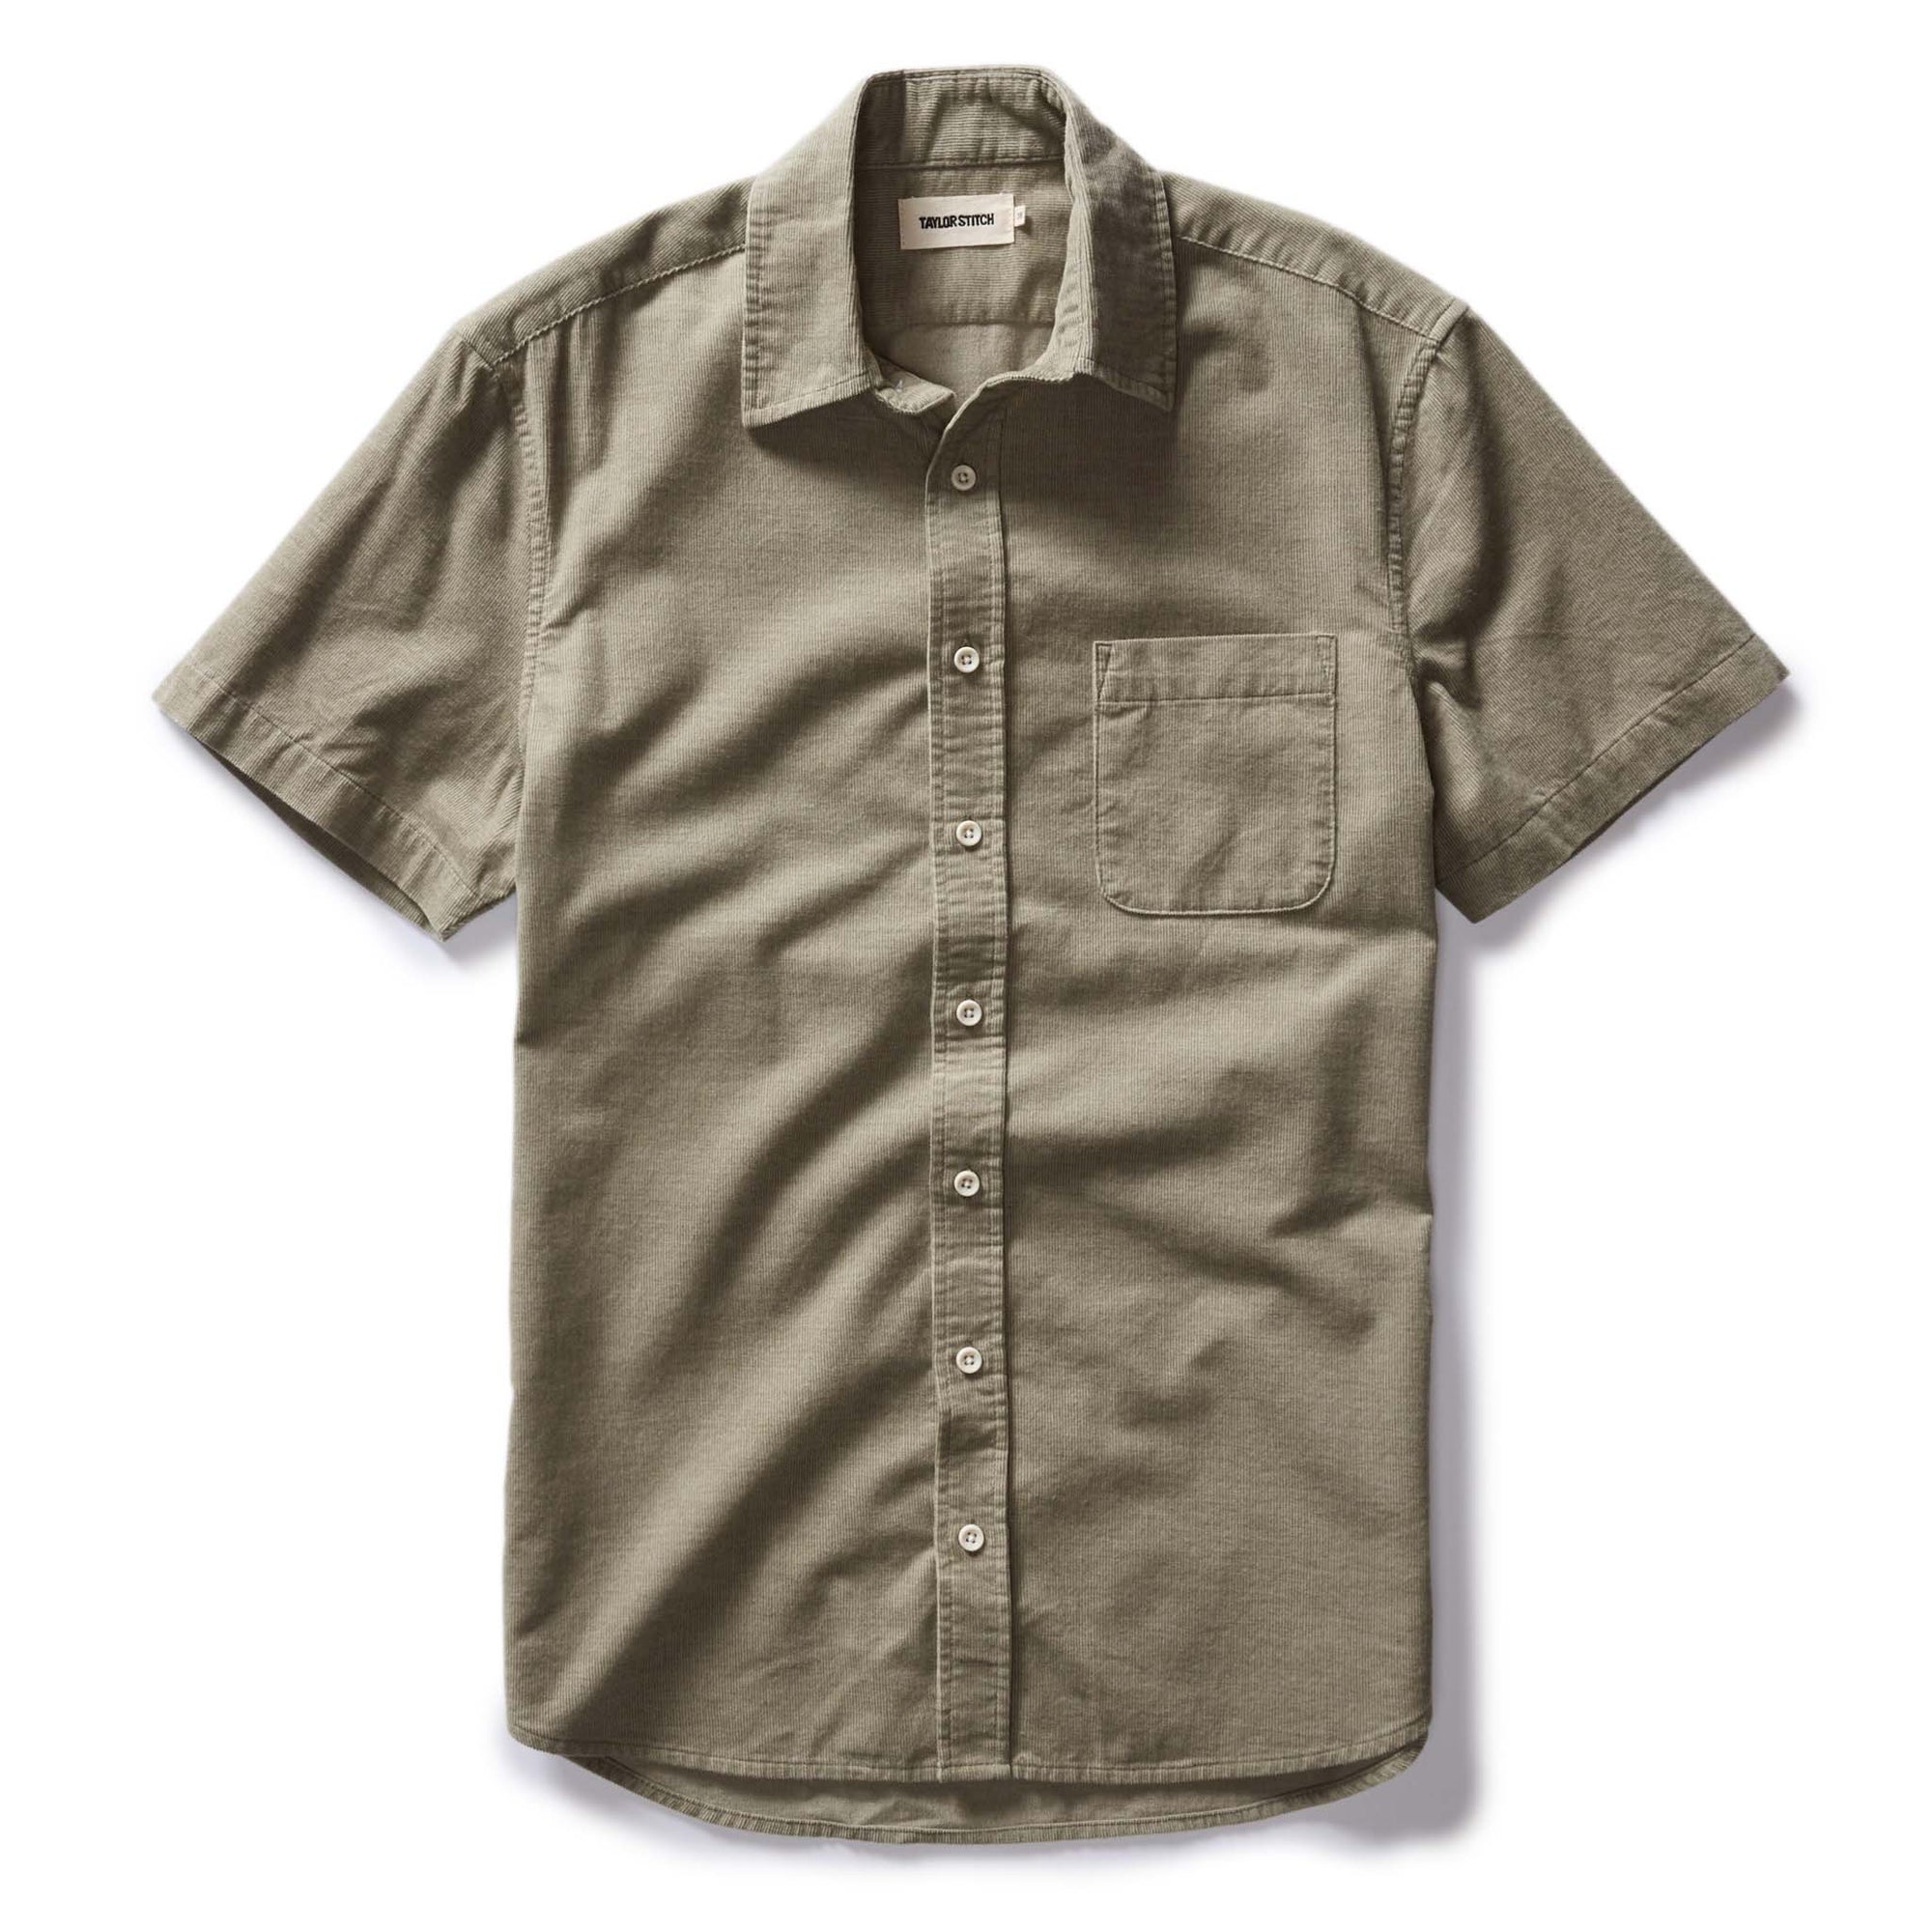 Taylor Stitch -  Short Sleeve California in Heather Moss Cord